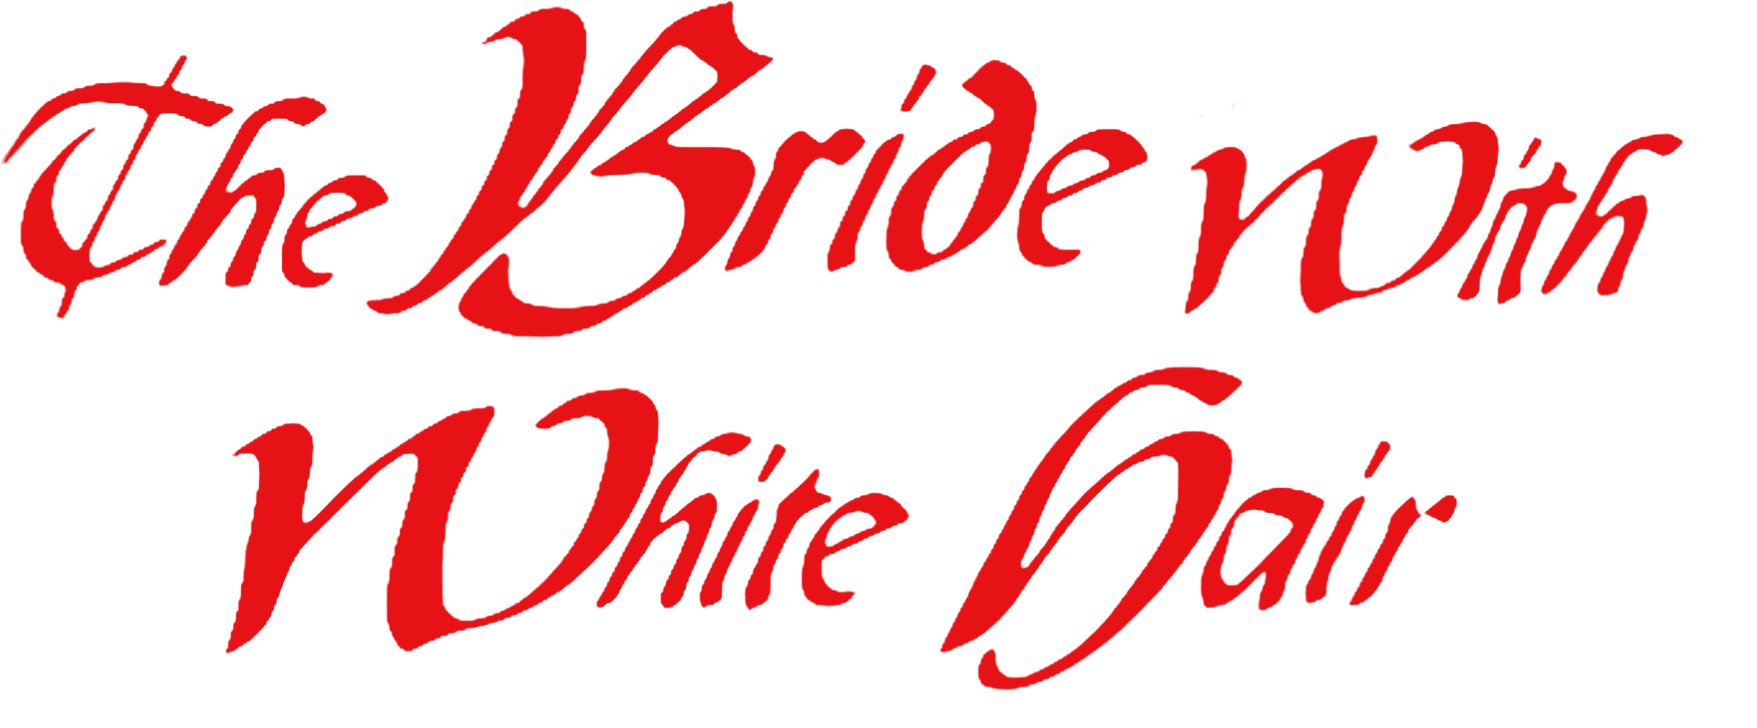 The Bride with White Hair logo